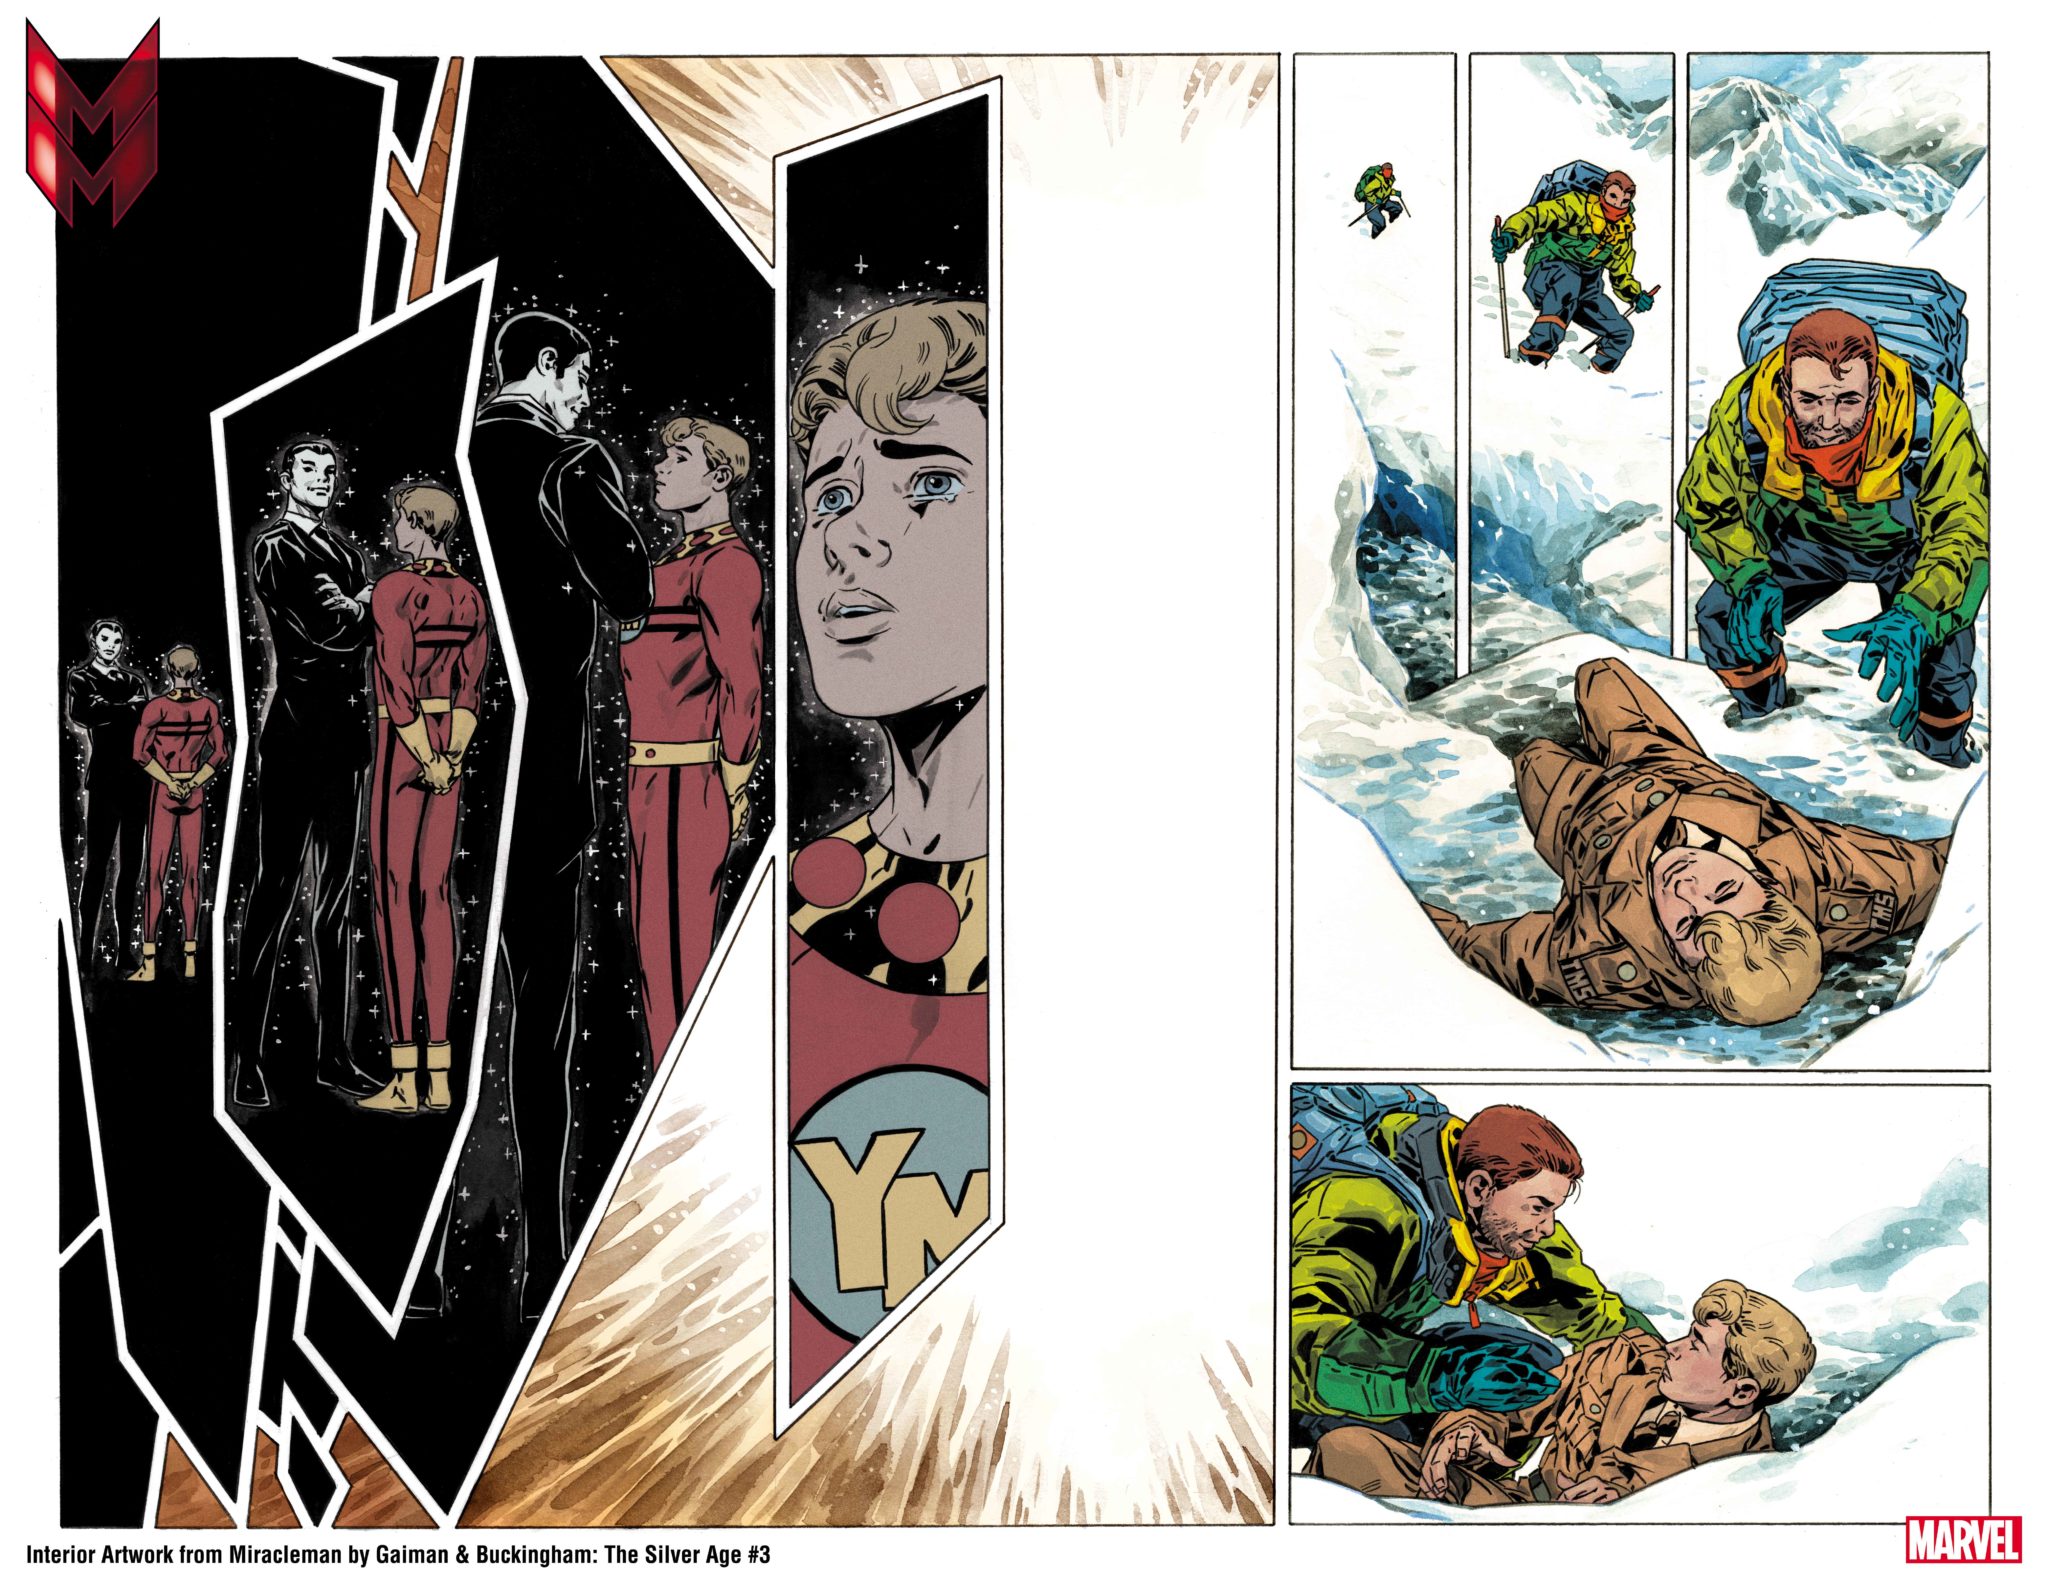 Miracleman: The Silver Age #3 interior